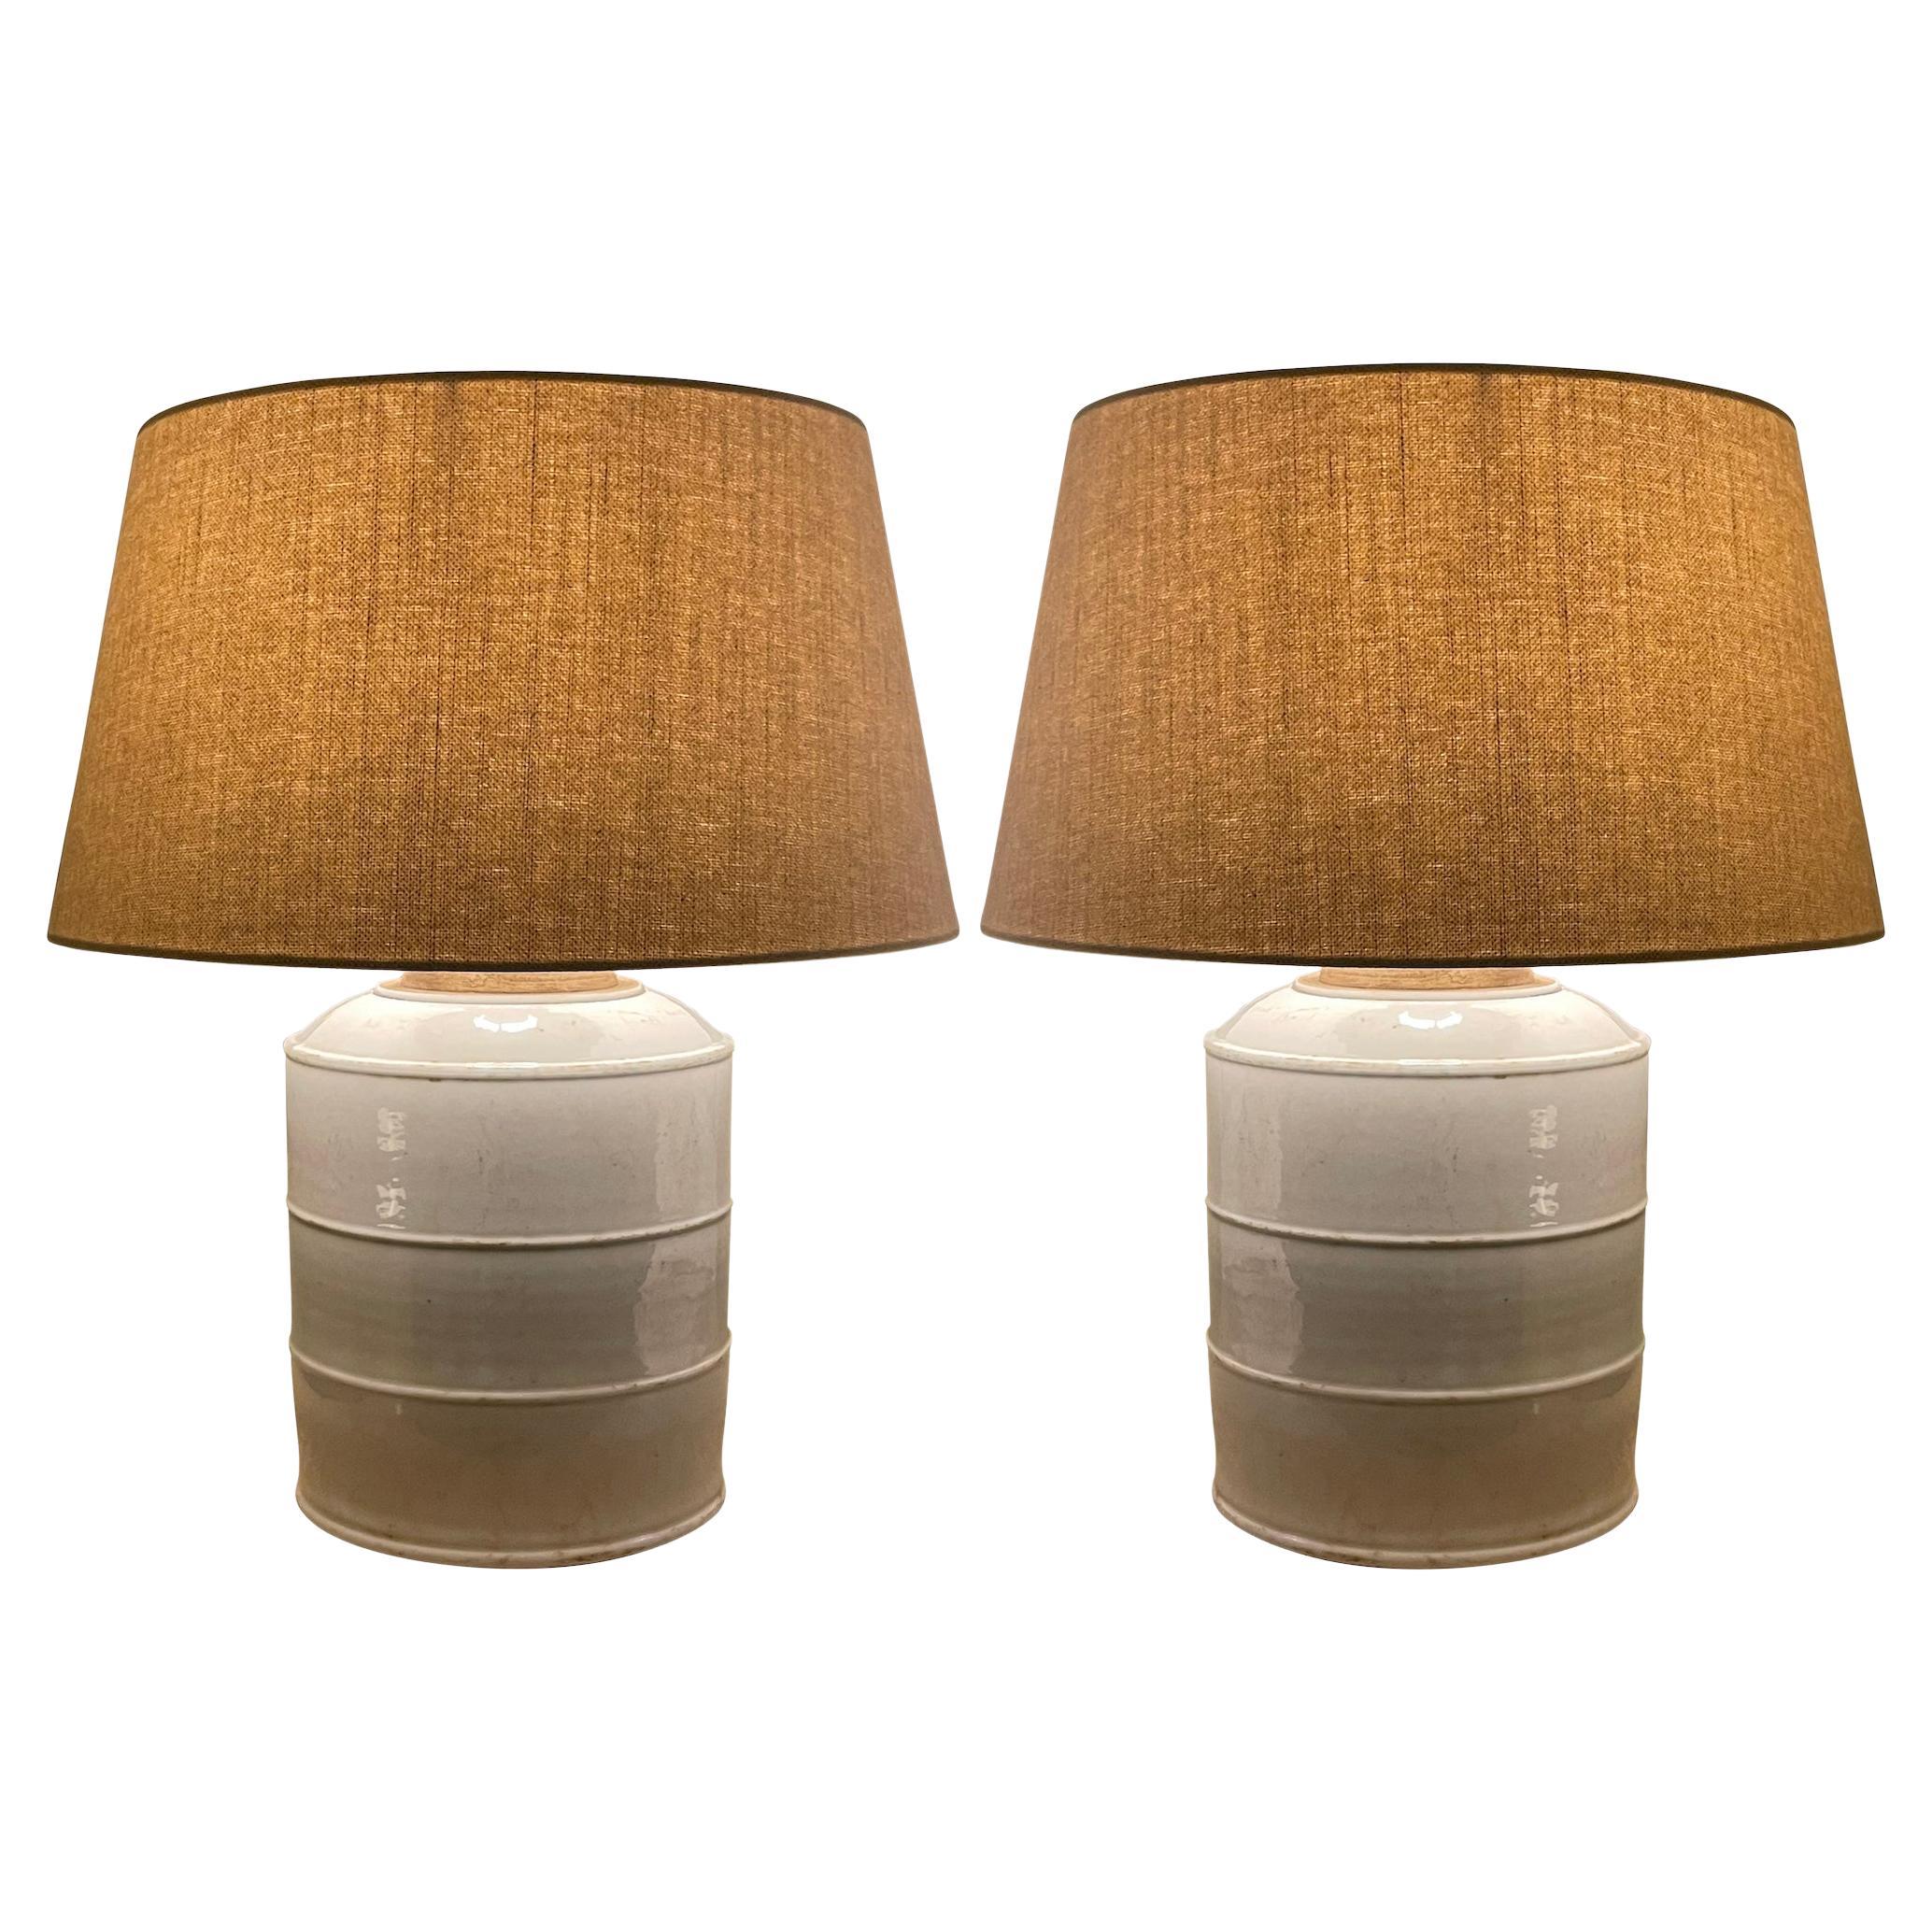 White Pair Canister Lamps, China, Contemporary